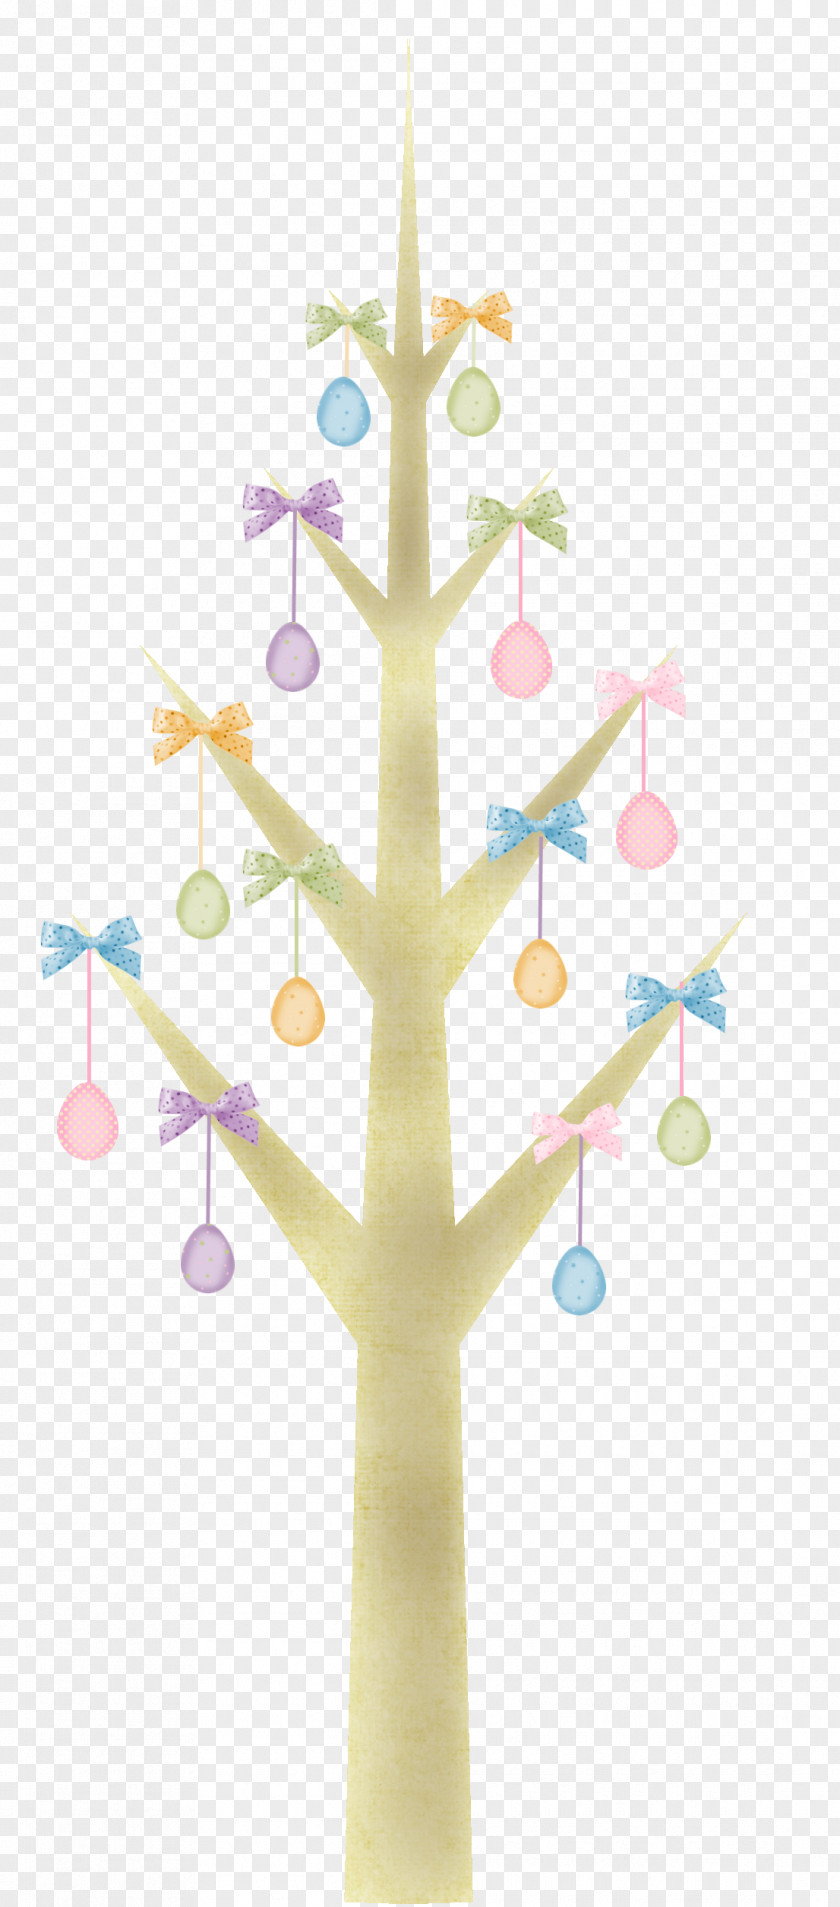 Creative Christmas Tree New Years Day Illustration PNG